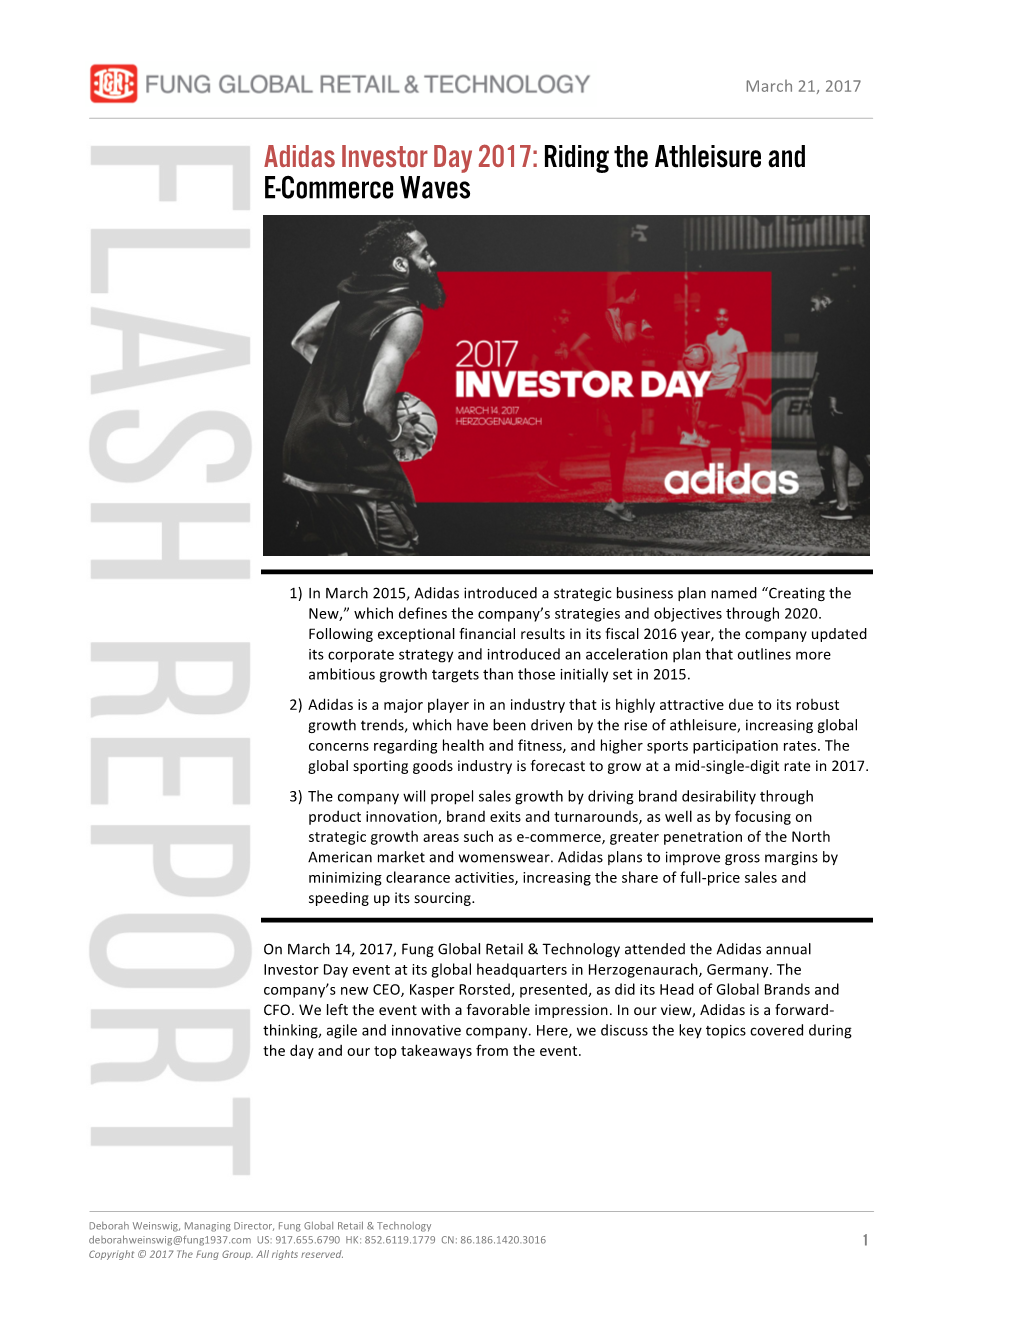 Adidas Investor Day 2017:Riding the Athleisure and E-Commerce Waves